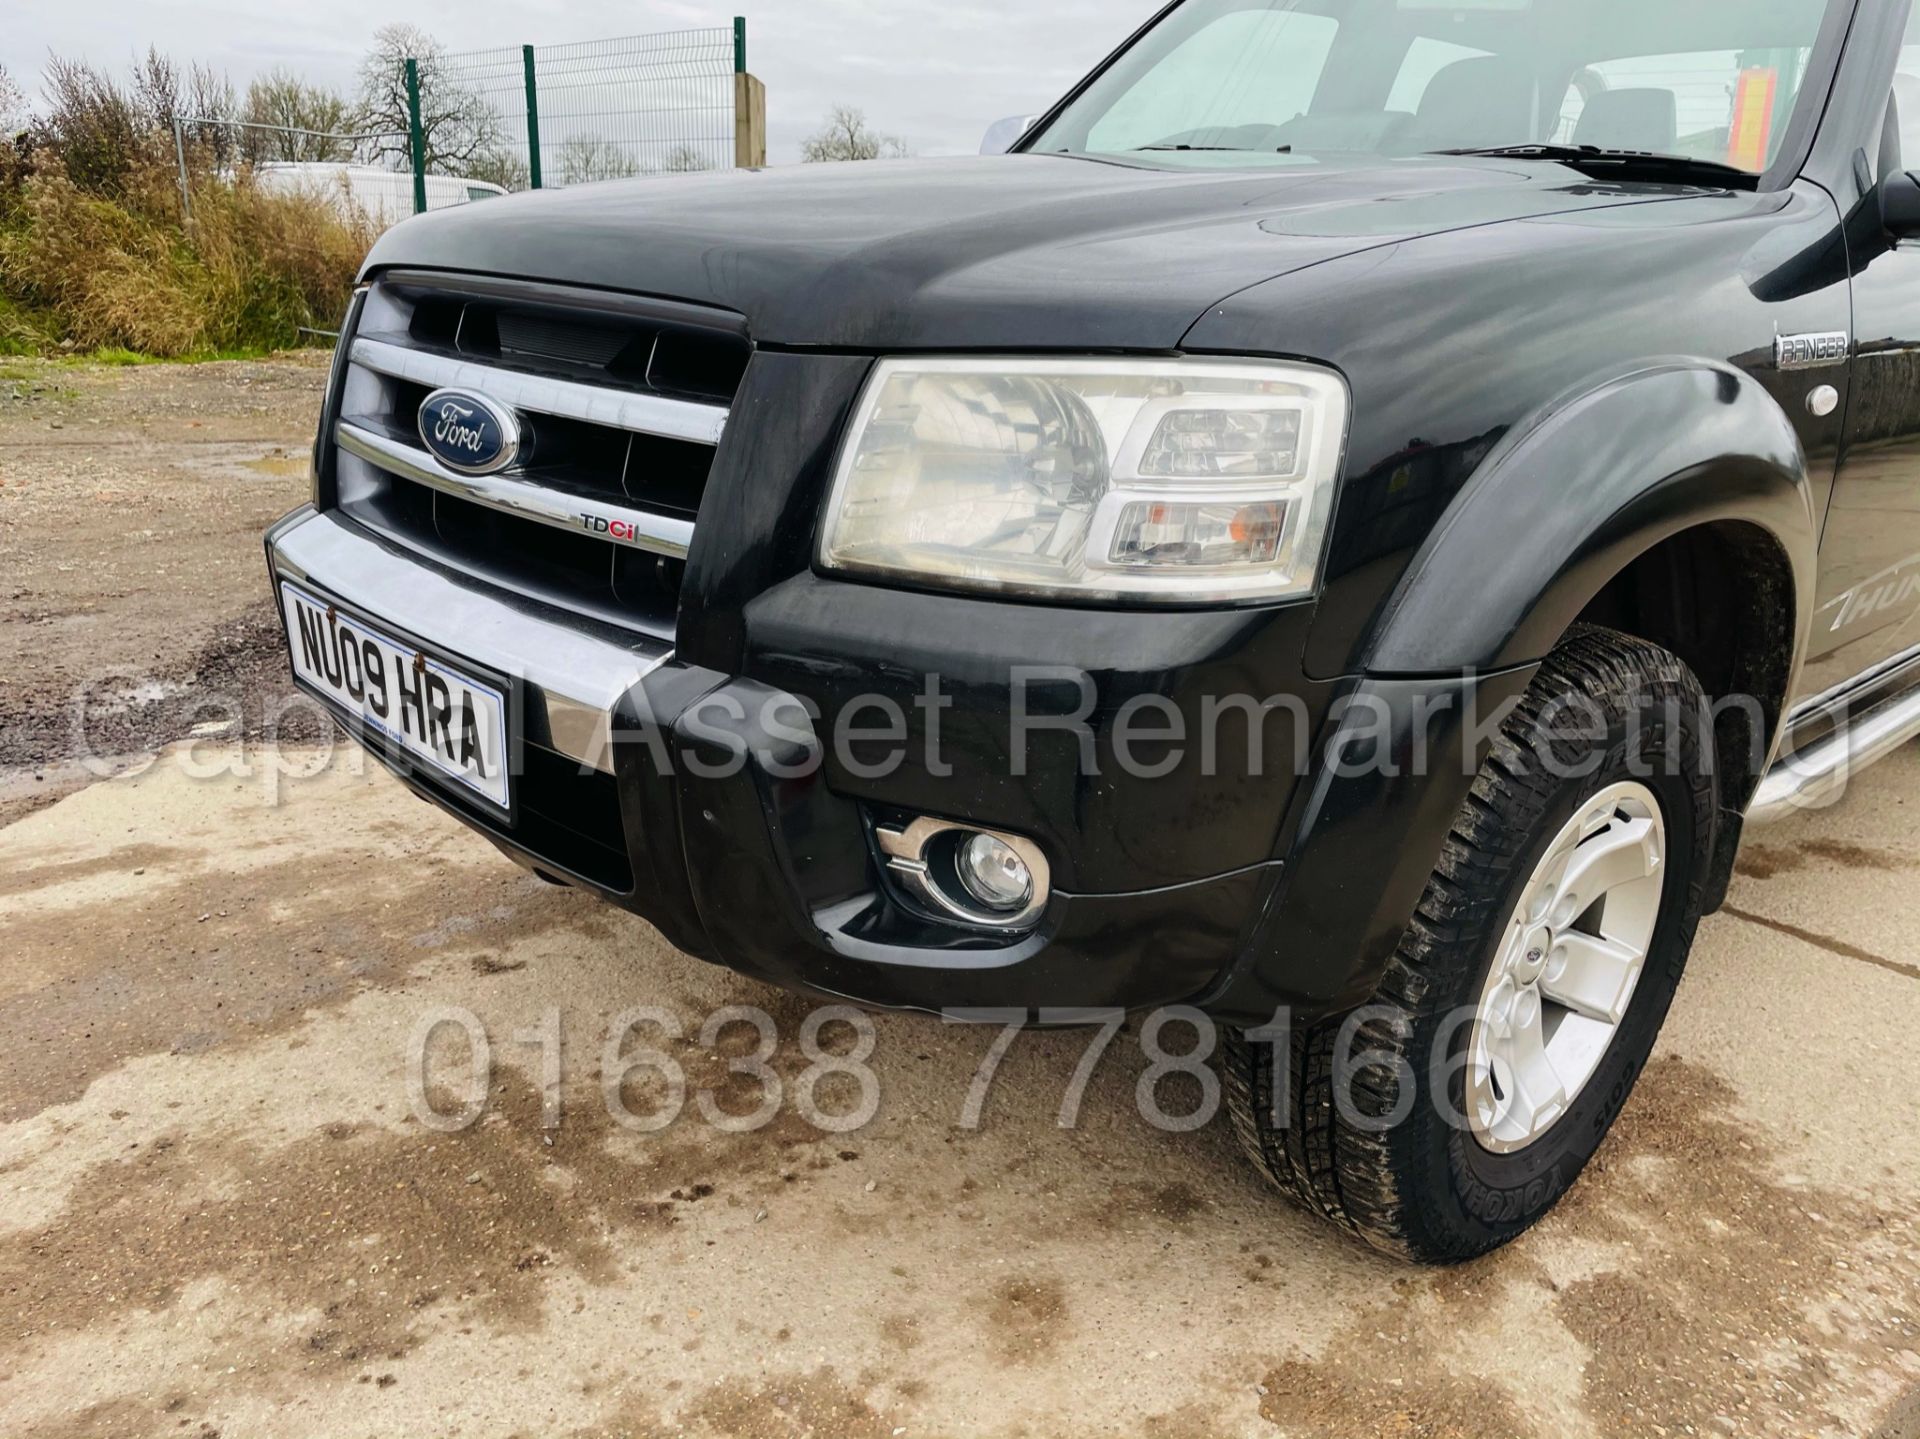 ON SALE FORD RANGER *THUNDER* DOUBLE CAB 4X4 PICK-UP (2009) '2.5 TDCI - 1 *LEATHER - A/C* (NO VAT) - Image 17 of 40